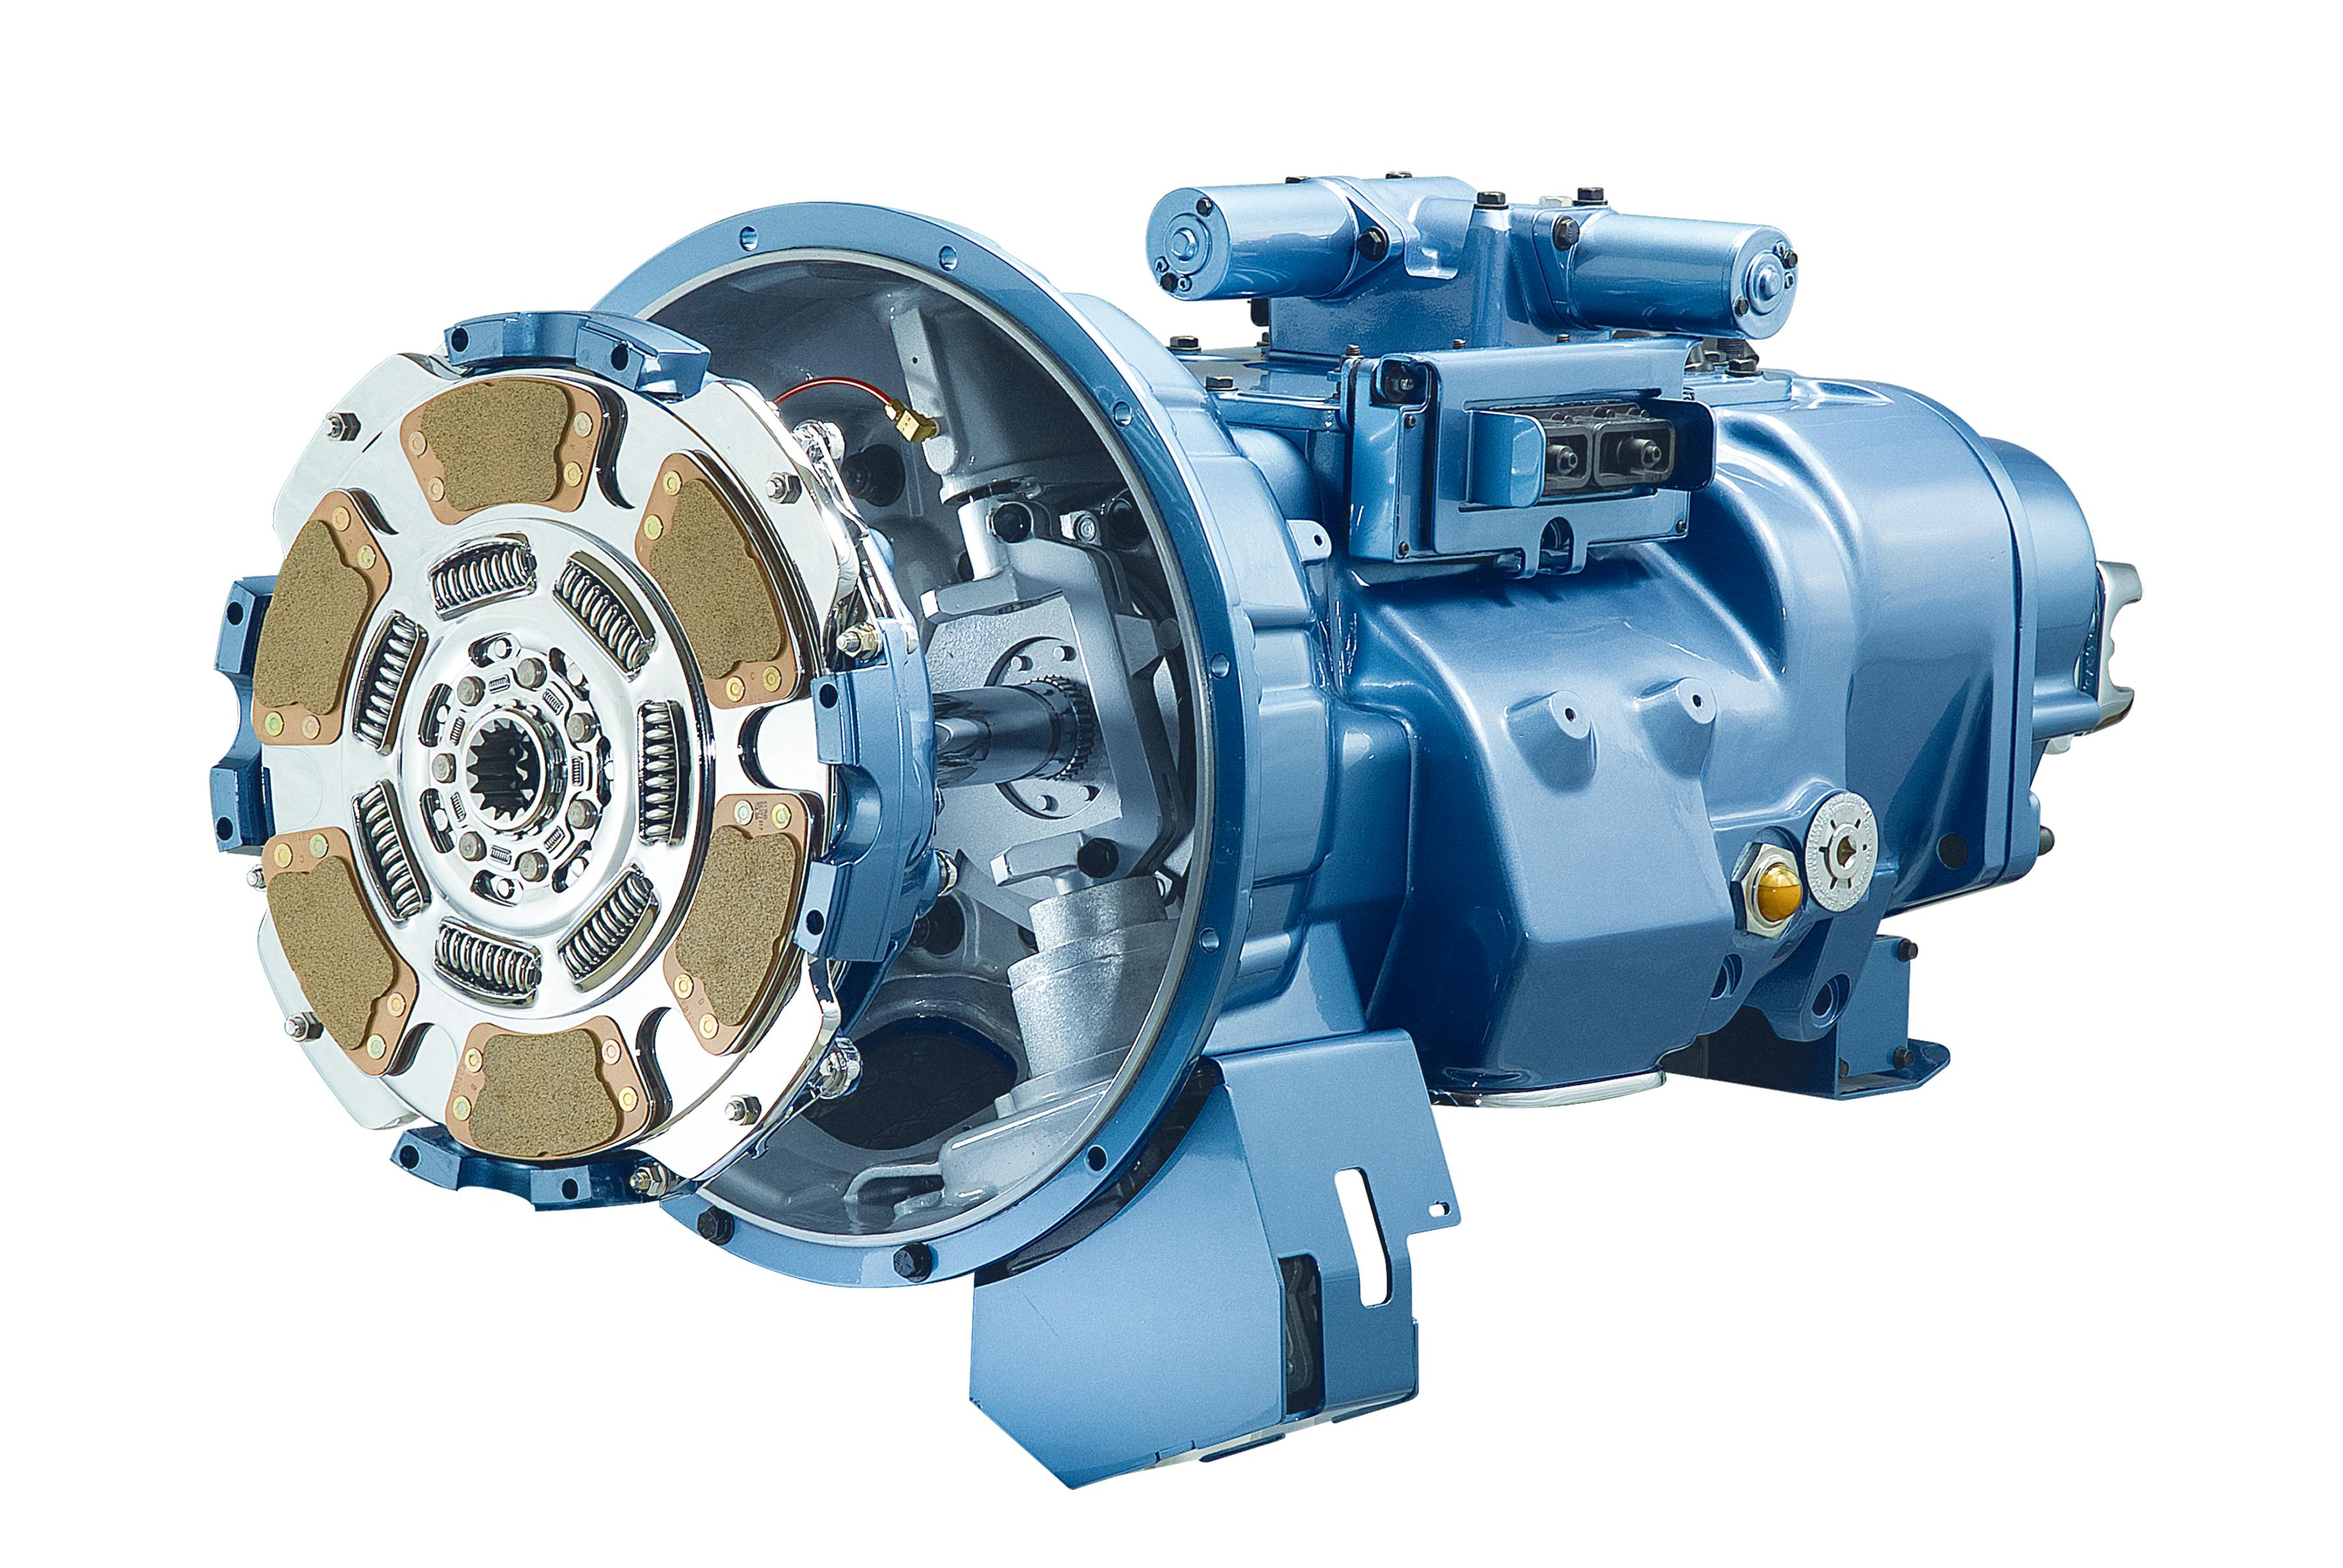 Eaton Adds Low-Speed-Maneuvering Options to Transmissions | Construction News